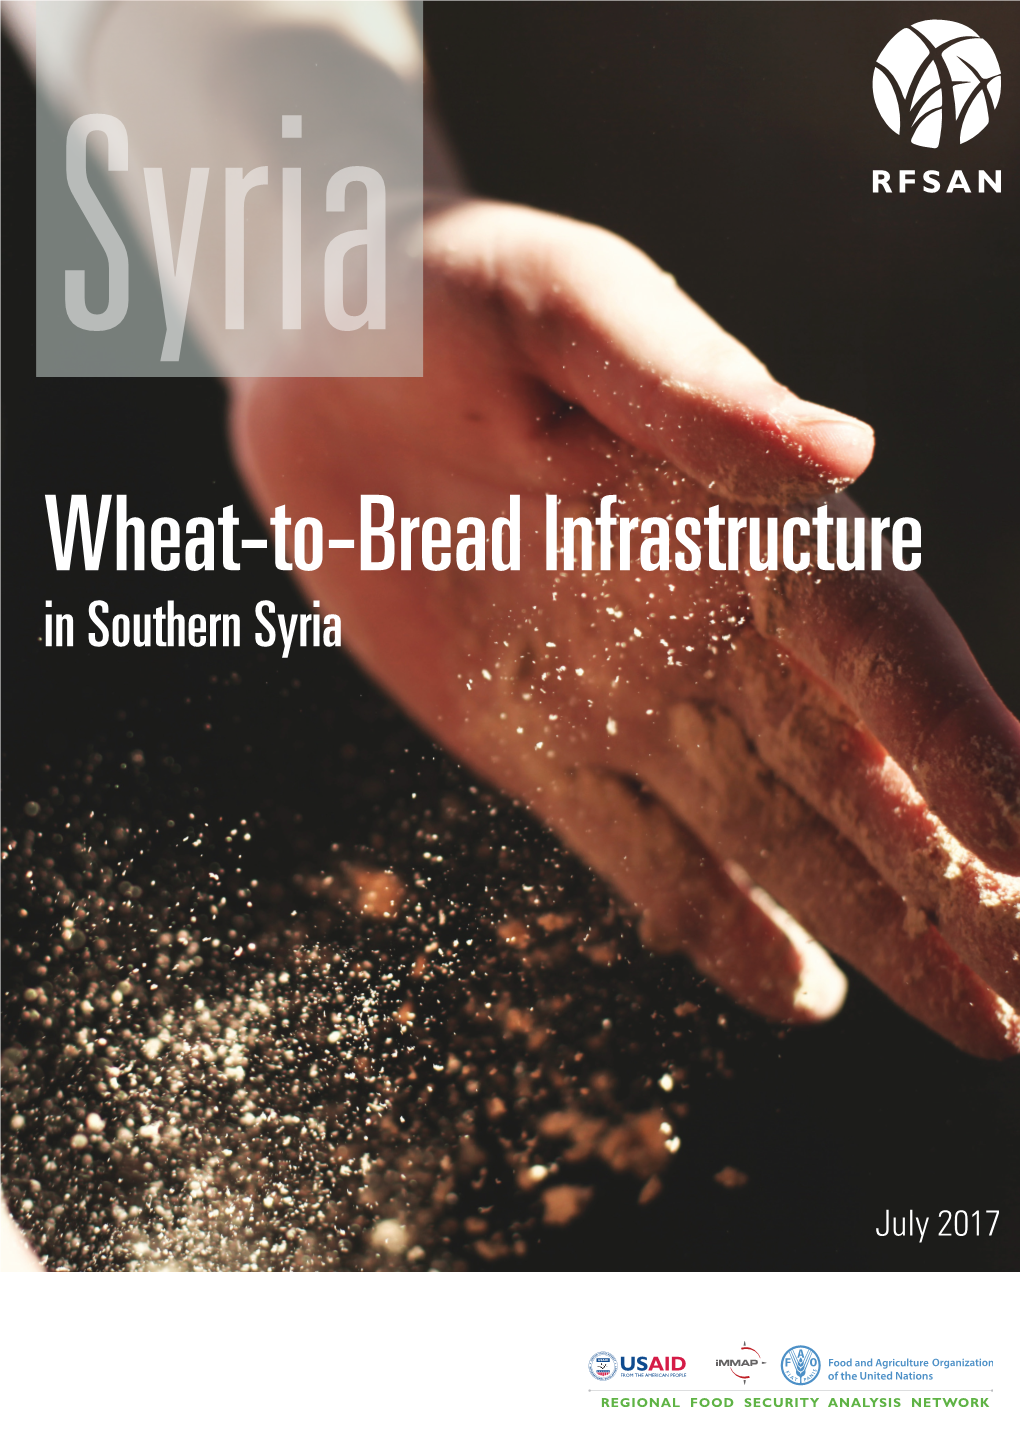 Wheat-To-Bread Infrastructure in Southern Syria